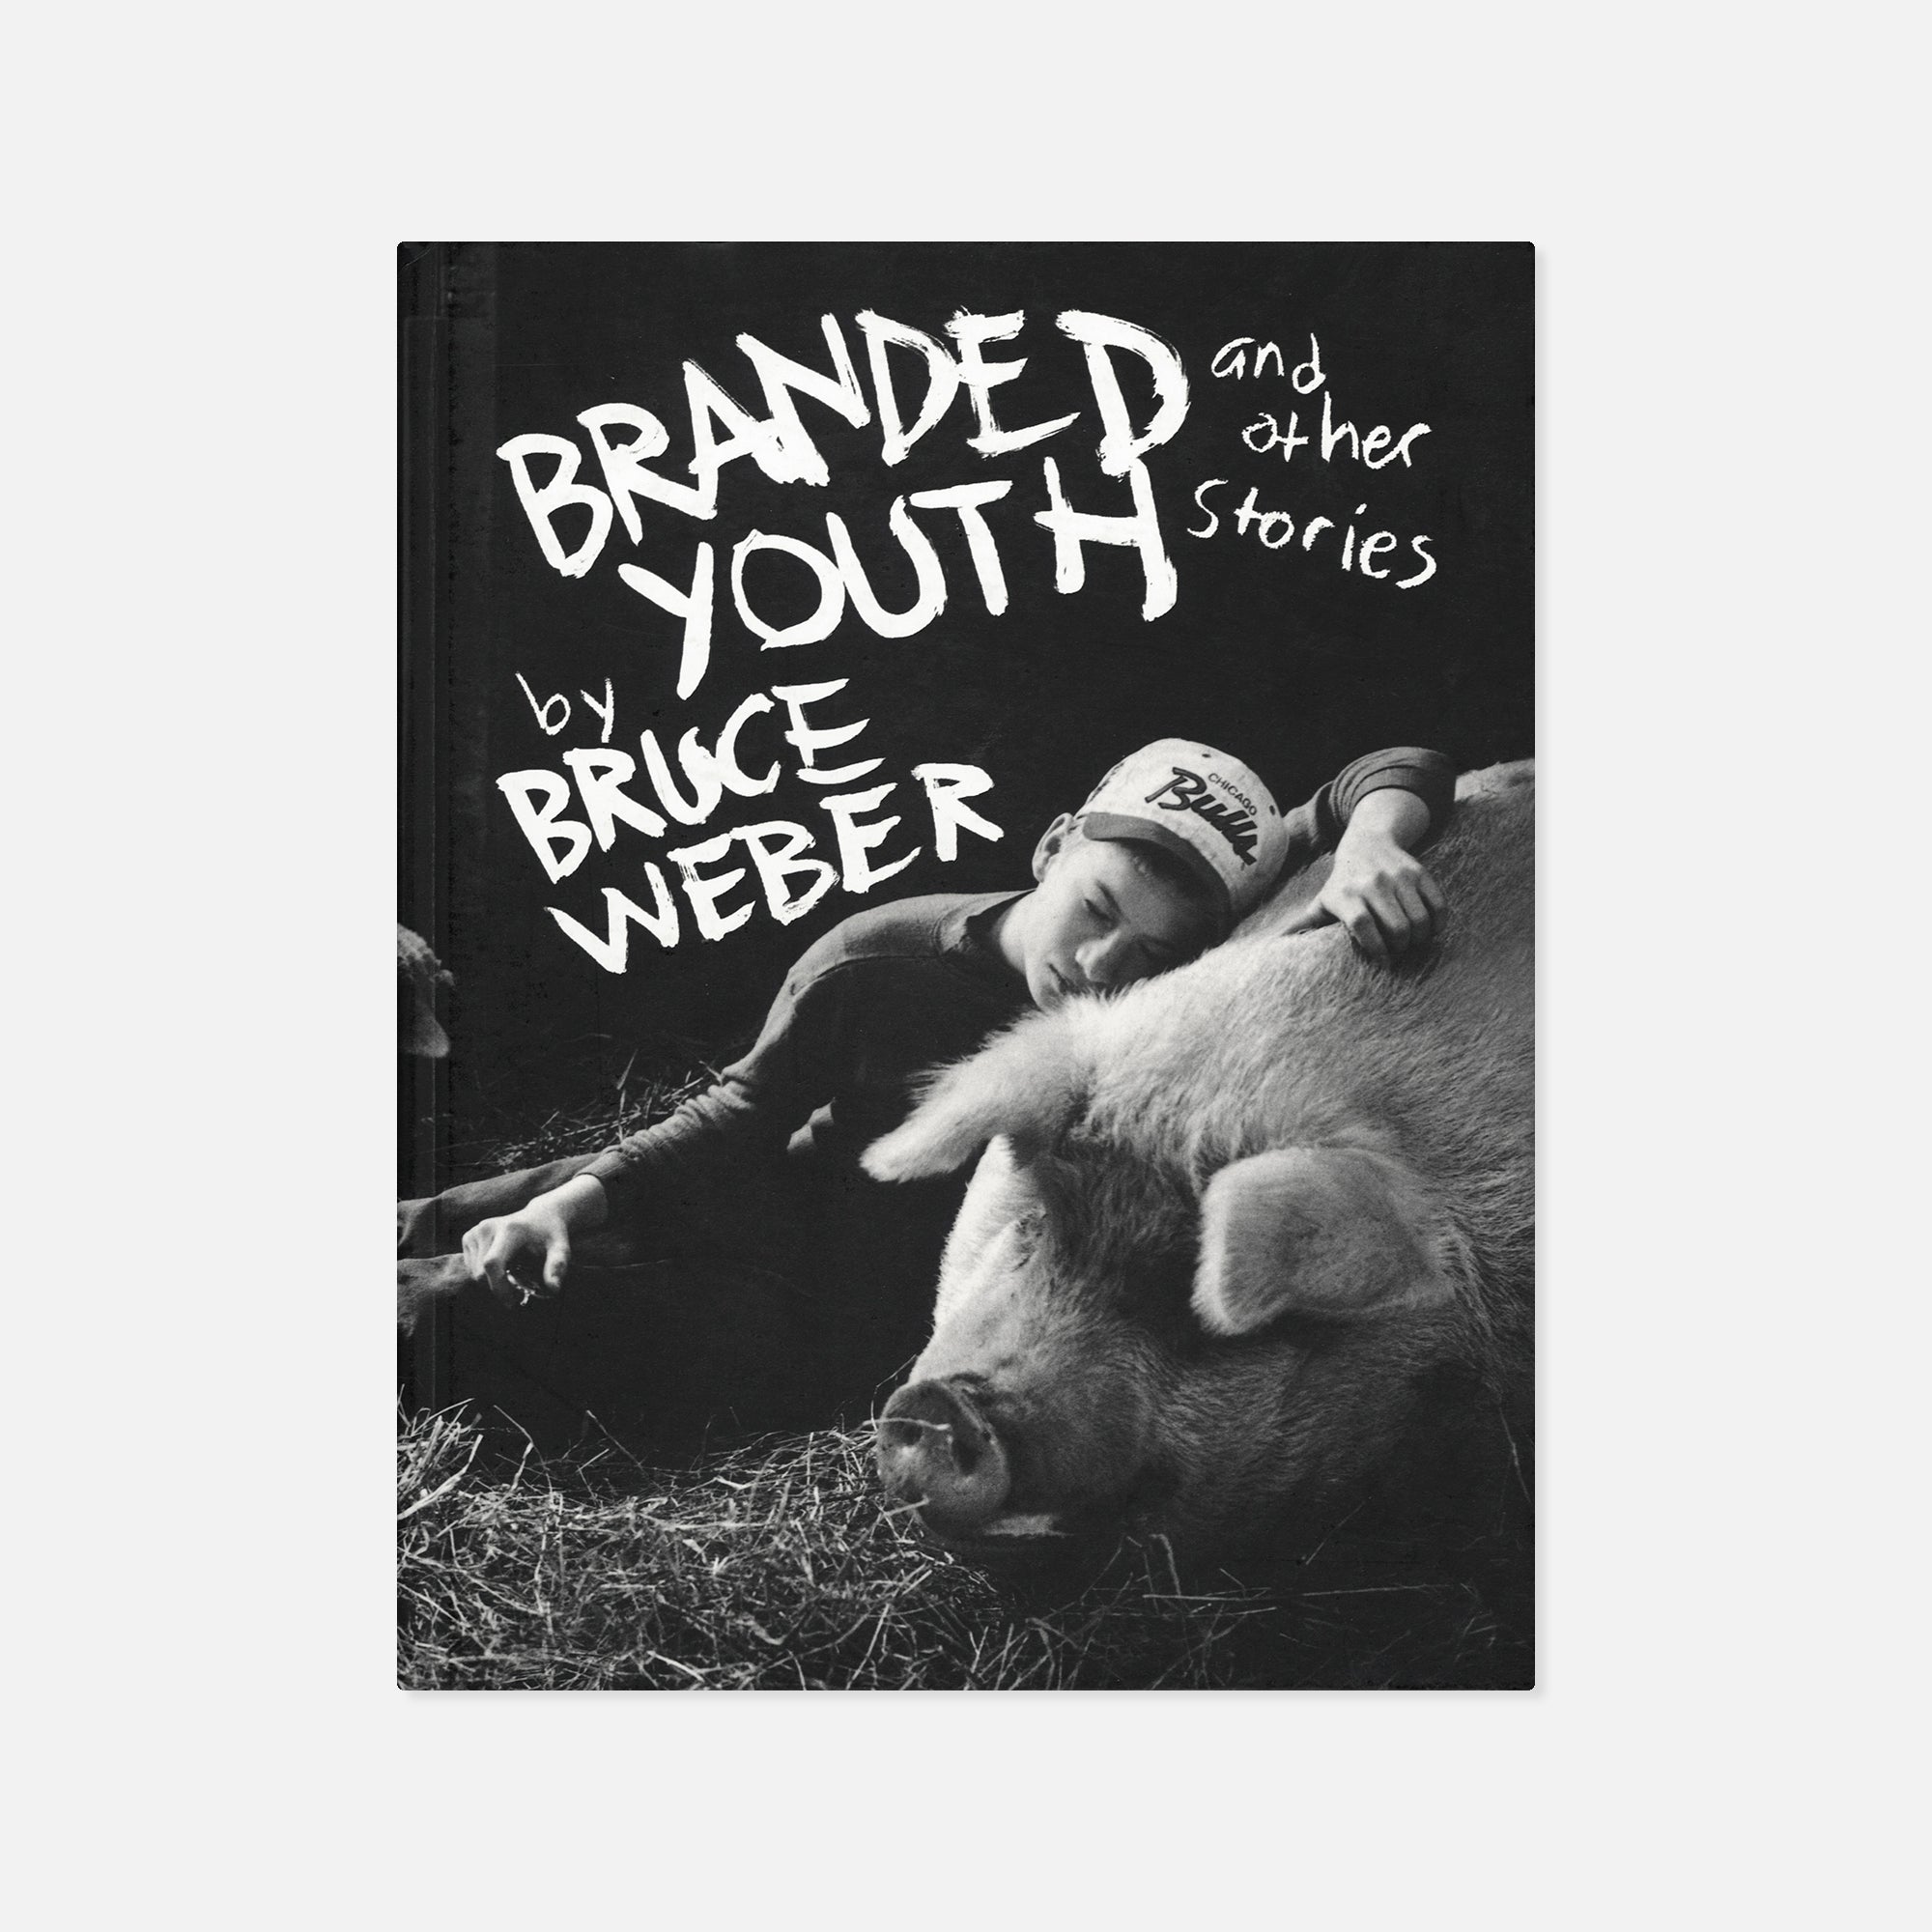 Bruce Weber — Branded Youth and Other Stories